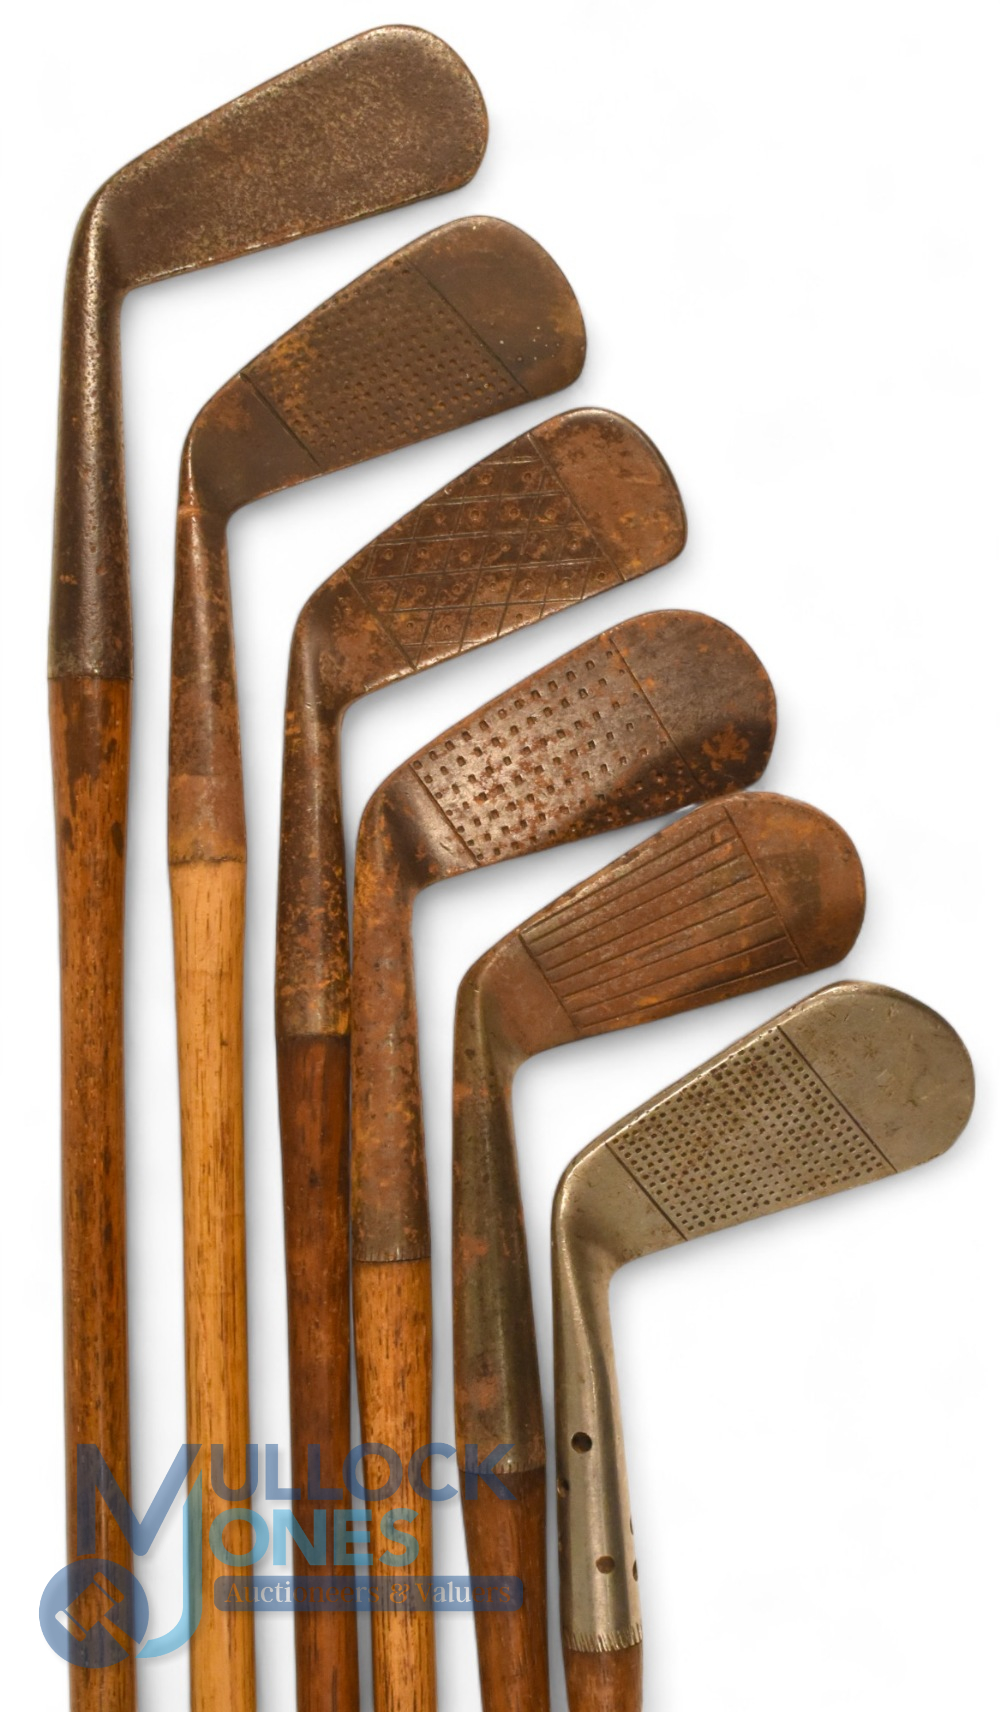 6x Assorted Irons incl Forgan Maxwell mashie, Gold Medal mashie by TA Galloway, T Walker No 2 - Image 2 of 2